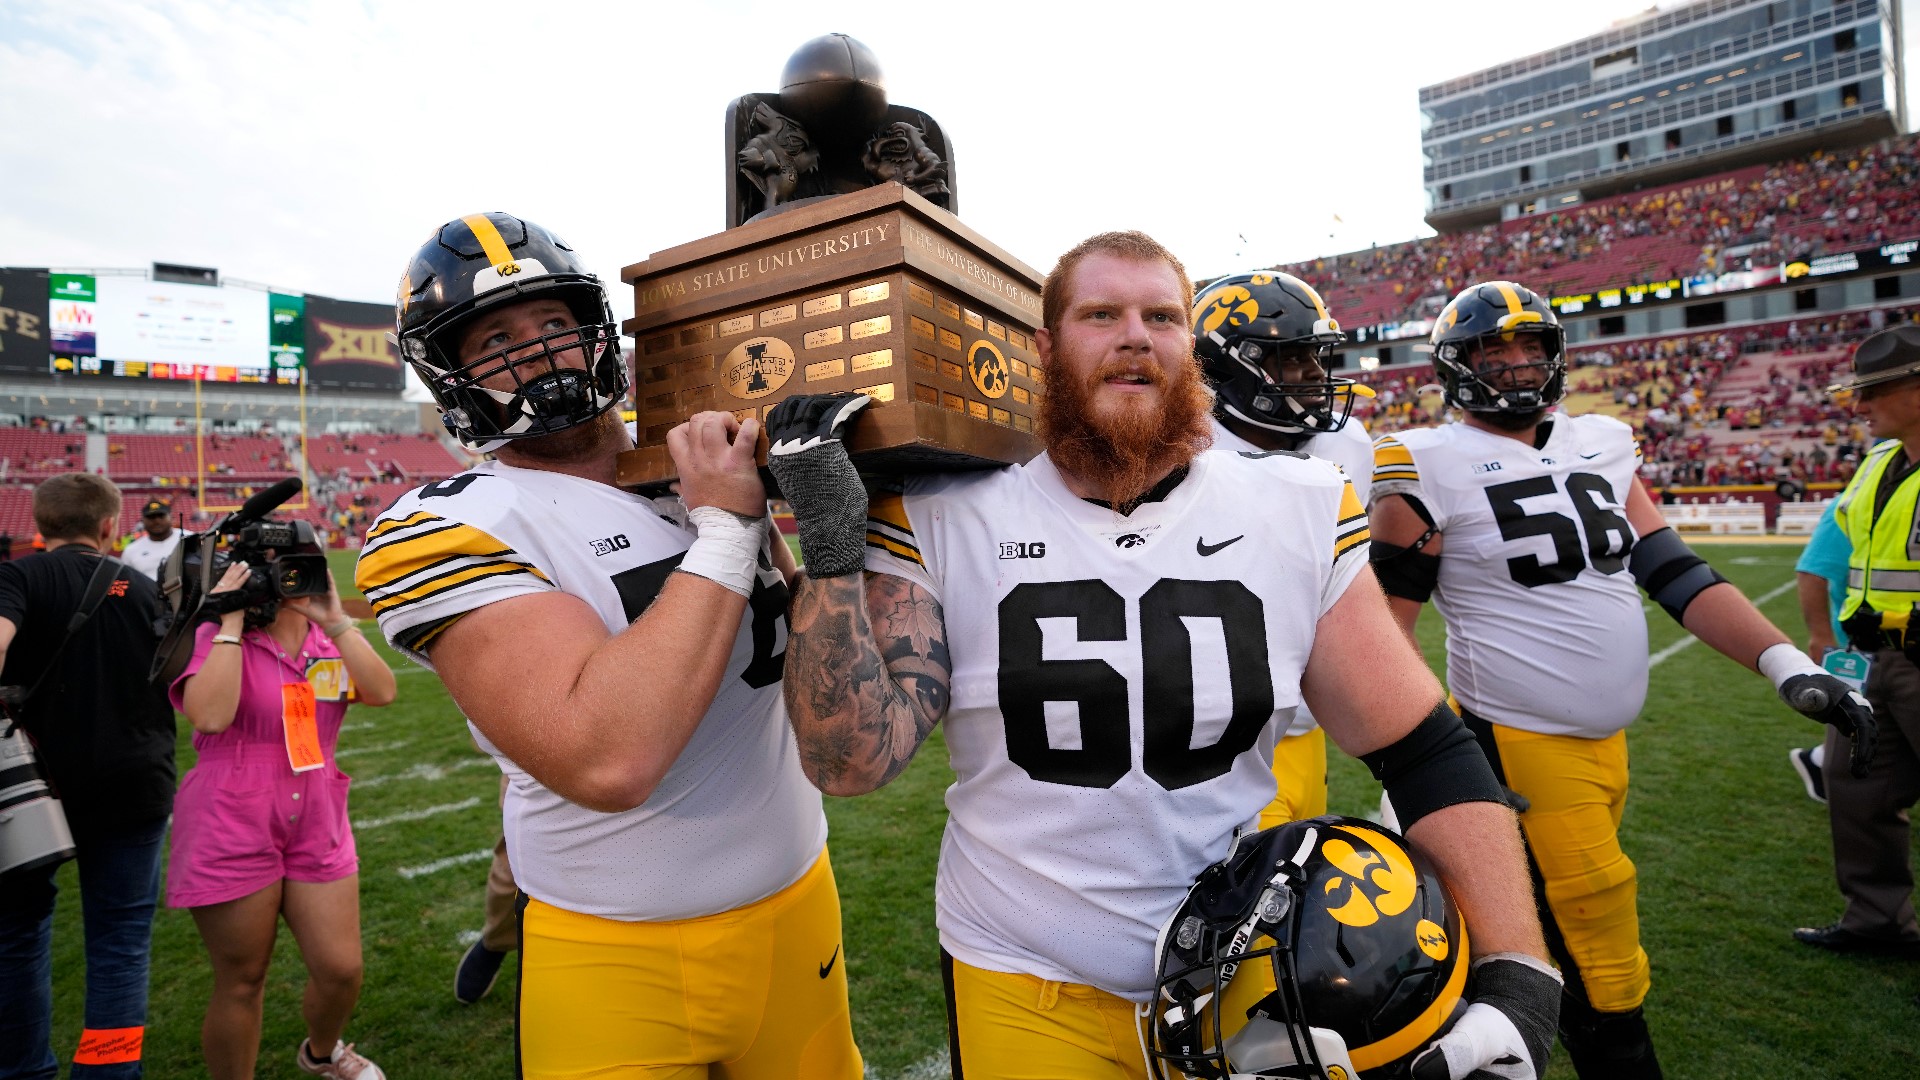 The Cy-Hawk Trophy is returning to Iowa City. Jaziun Patterson rushed for 86 yards for the Hawkeyes, and Sebastian Castro had a pick-six for the Iowa defense.